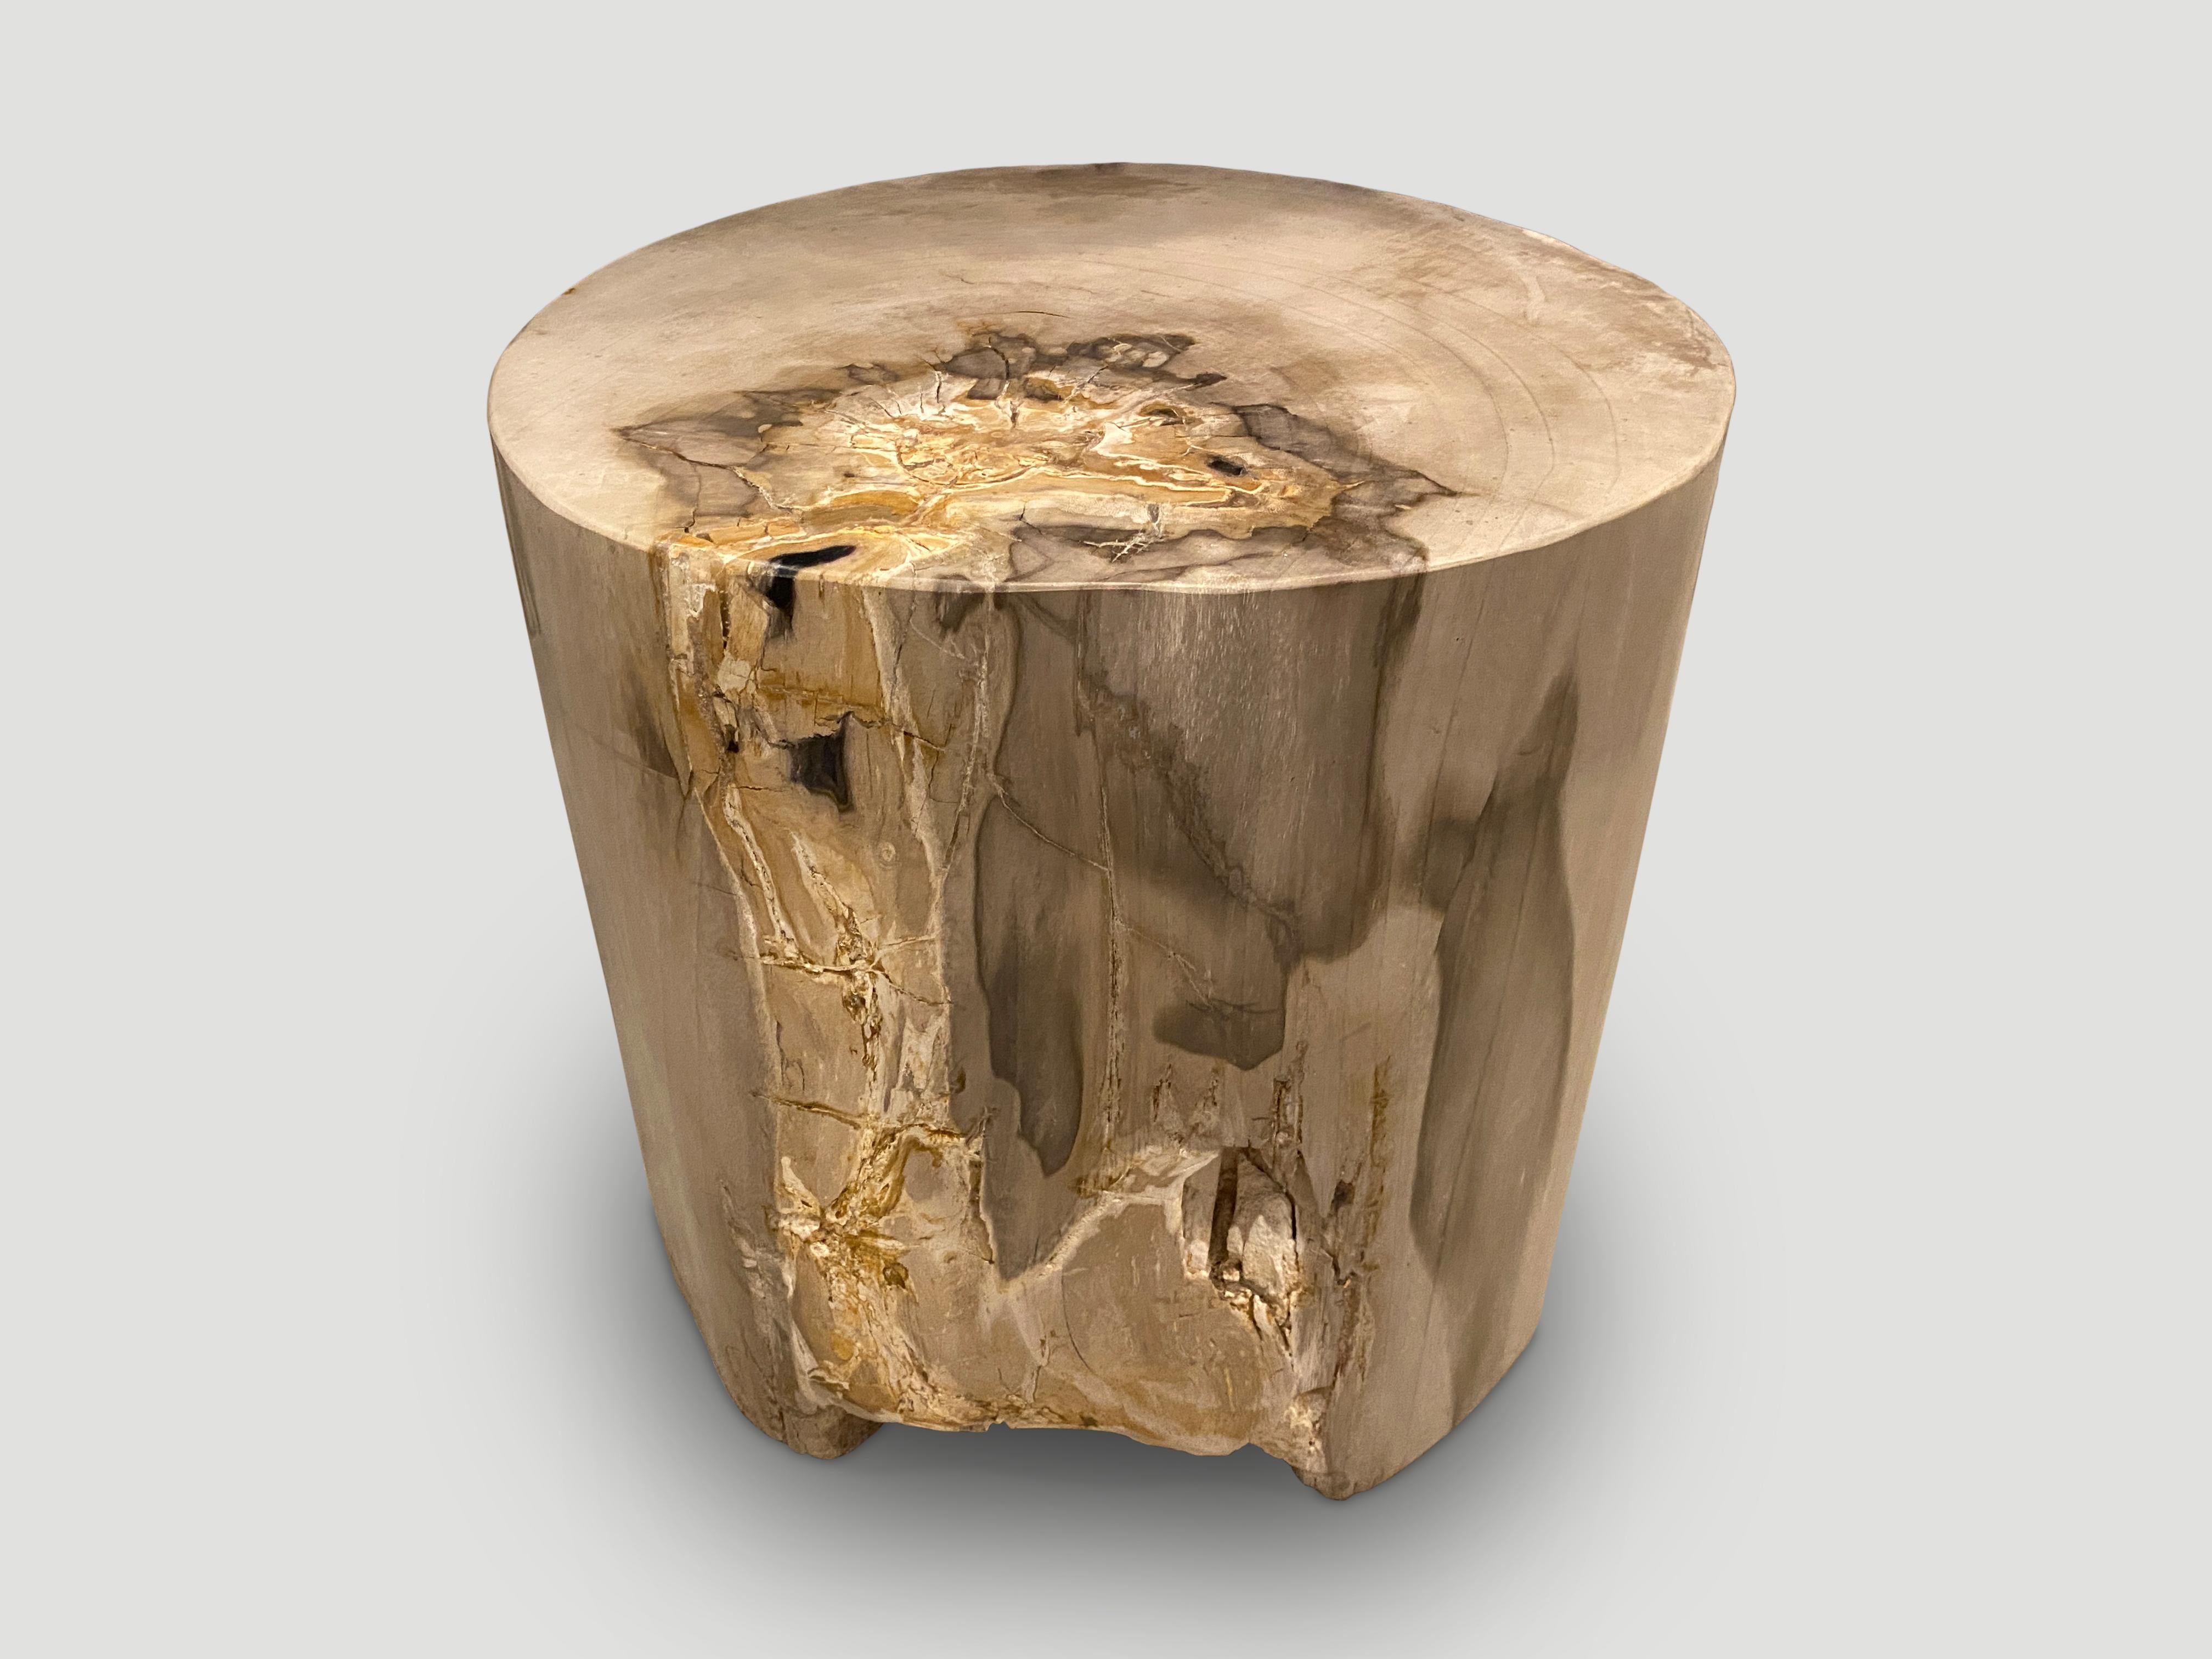 Impressive beautiful contrasting markings on this high quality super smooth, petrified wood side table. It’s fascinating how Mother Nature produces these stunning 40 million year old petrified teak logs with such contrasting colors and natural